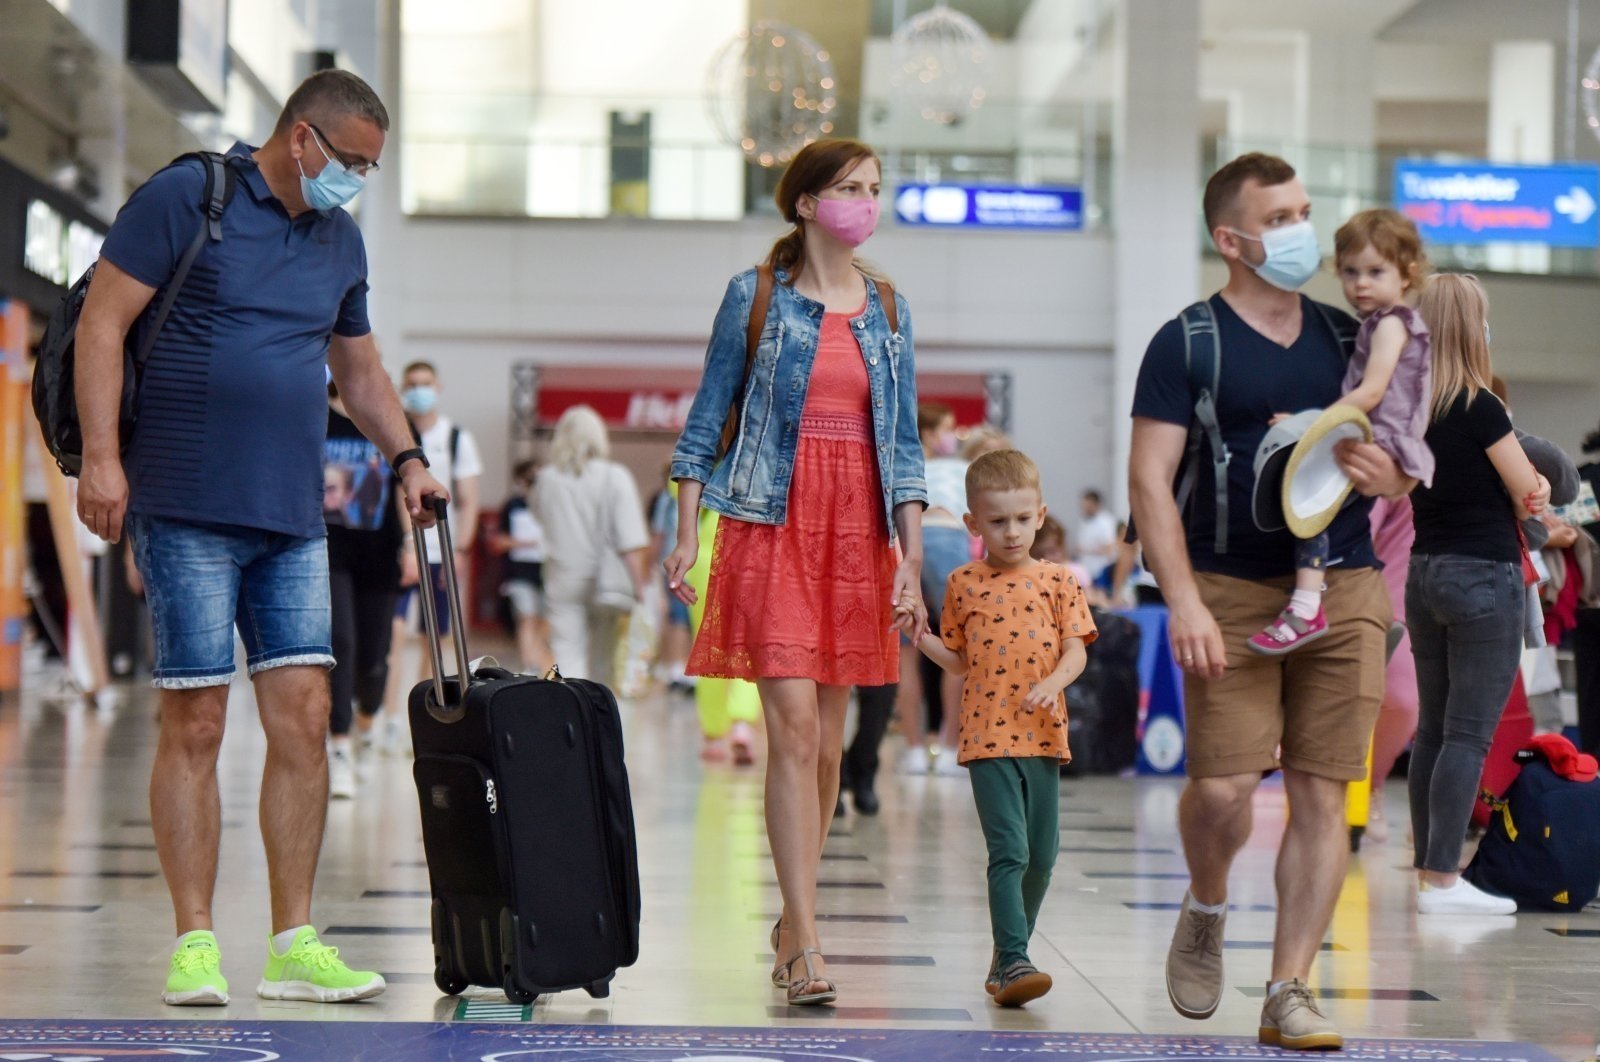 Russian tourists exit the airport as they arrive in Antalya, southern Türkiye, June 29, 2021. (IHA Photo)